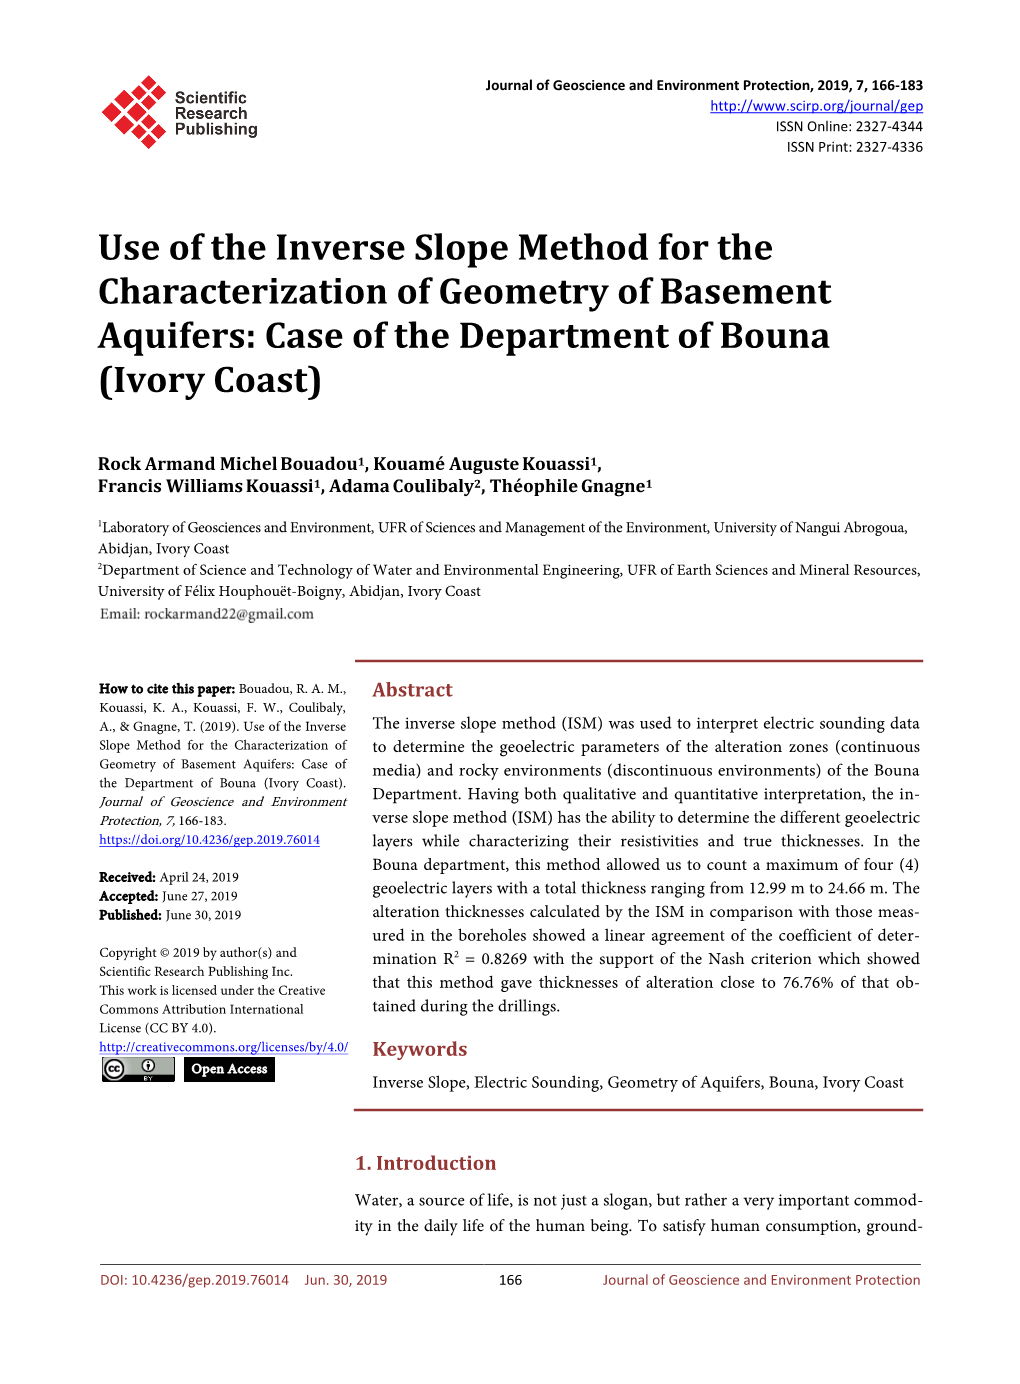 Use of the Inverse Slope Method for the Characterization of Geometry of Basement Aquifers: Case of the Department of Bouna (Ivory Coast)